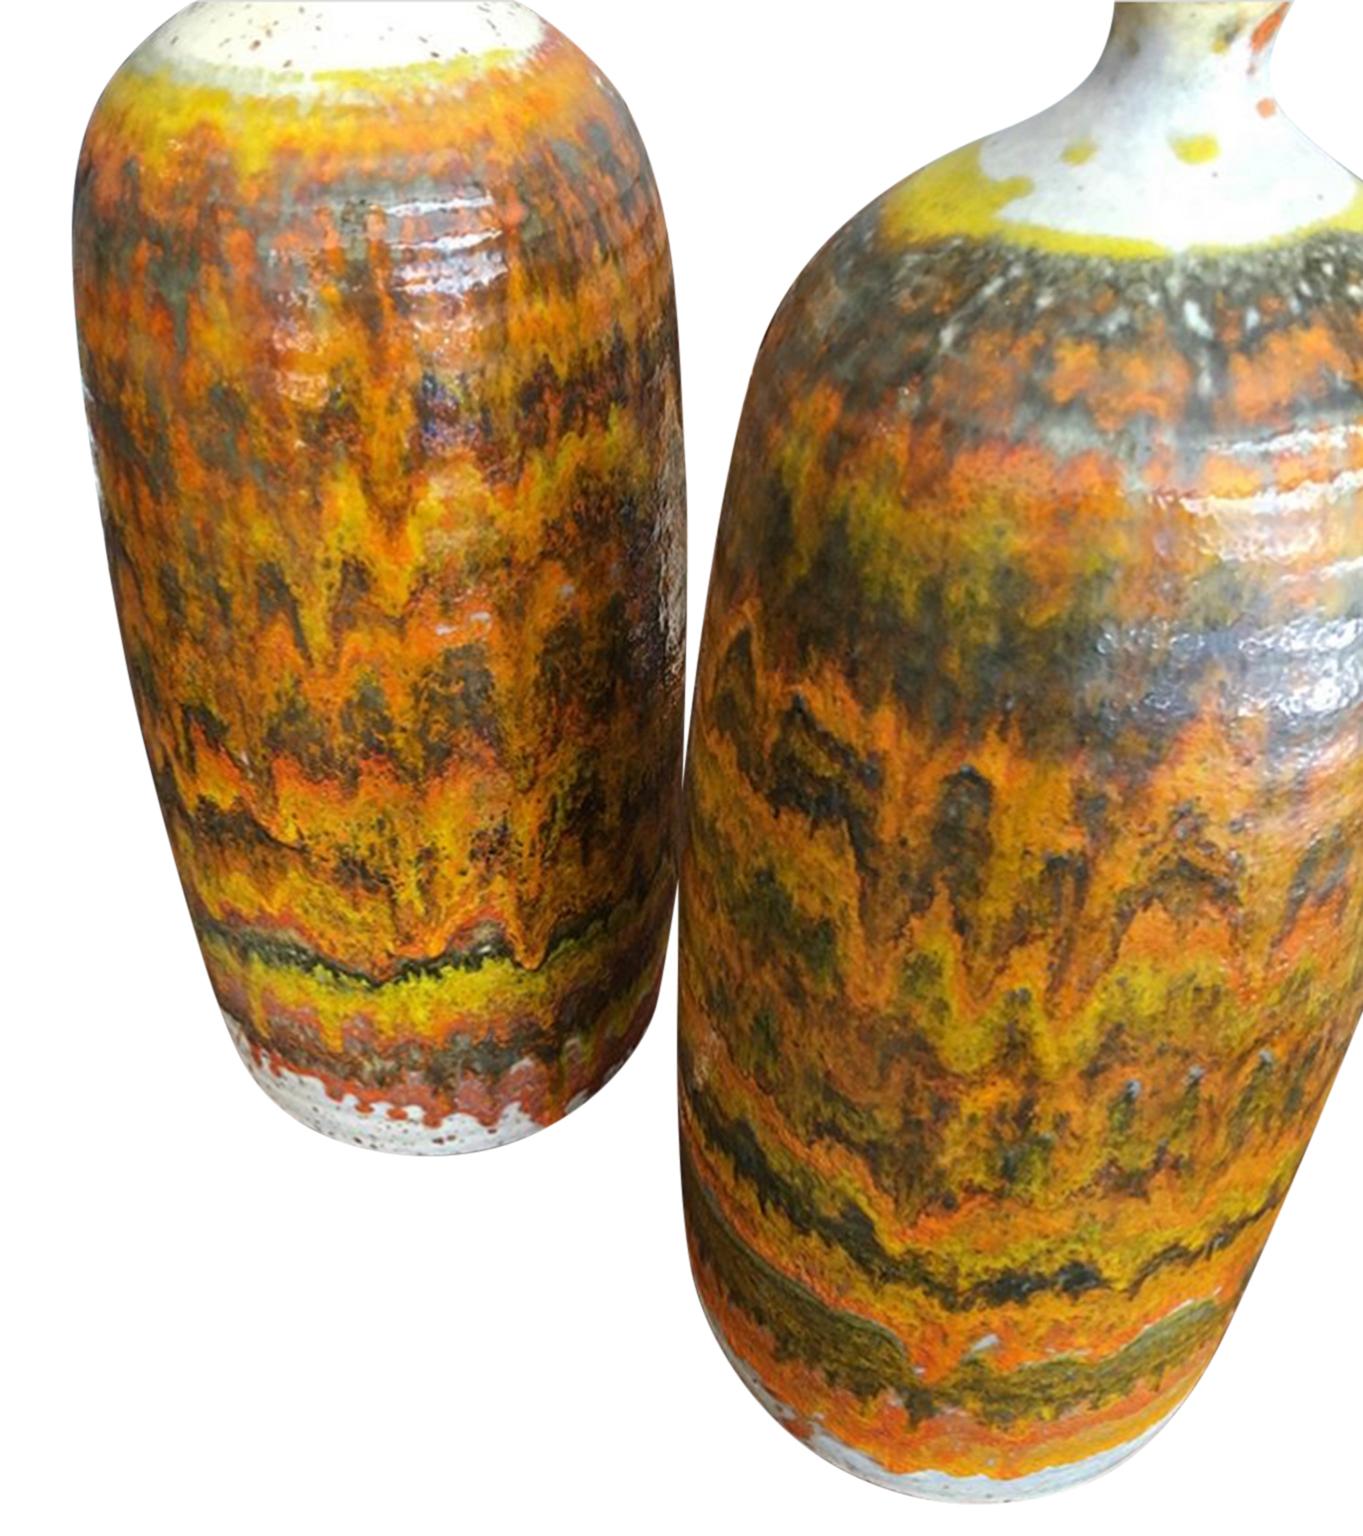 Amazing midcentury pair of unique lava glaze ceramic table lamps circa 1960- designer unknown. Made in Italy - see images. Beautiful unique pair of matching lamps. Comes with original shades. Lamps work 100%.